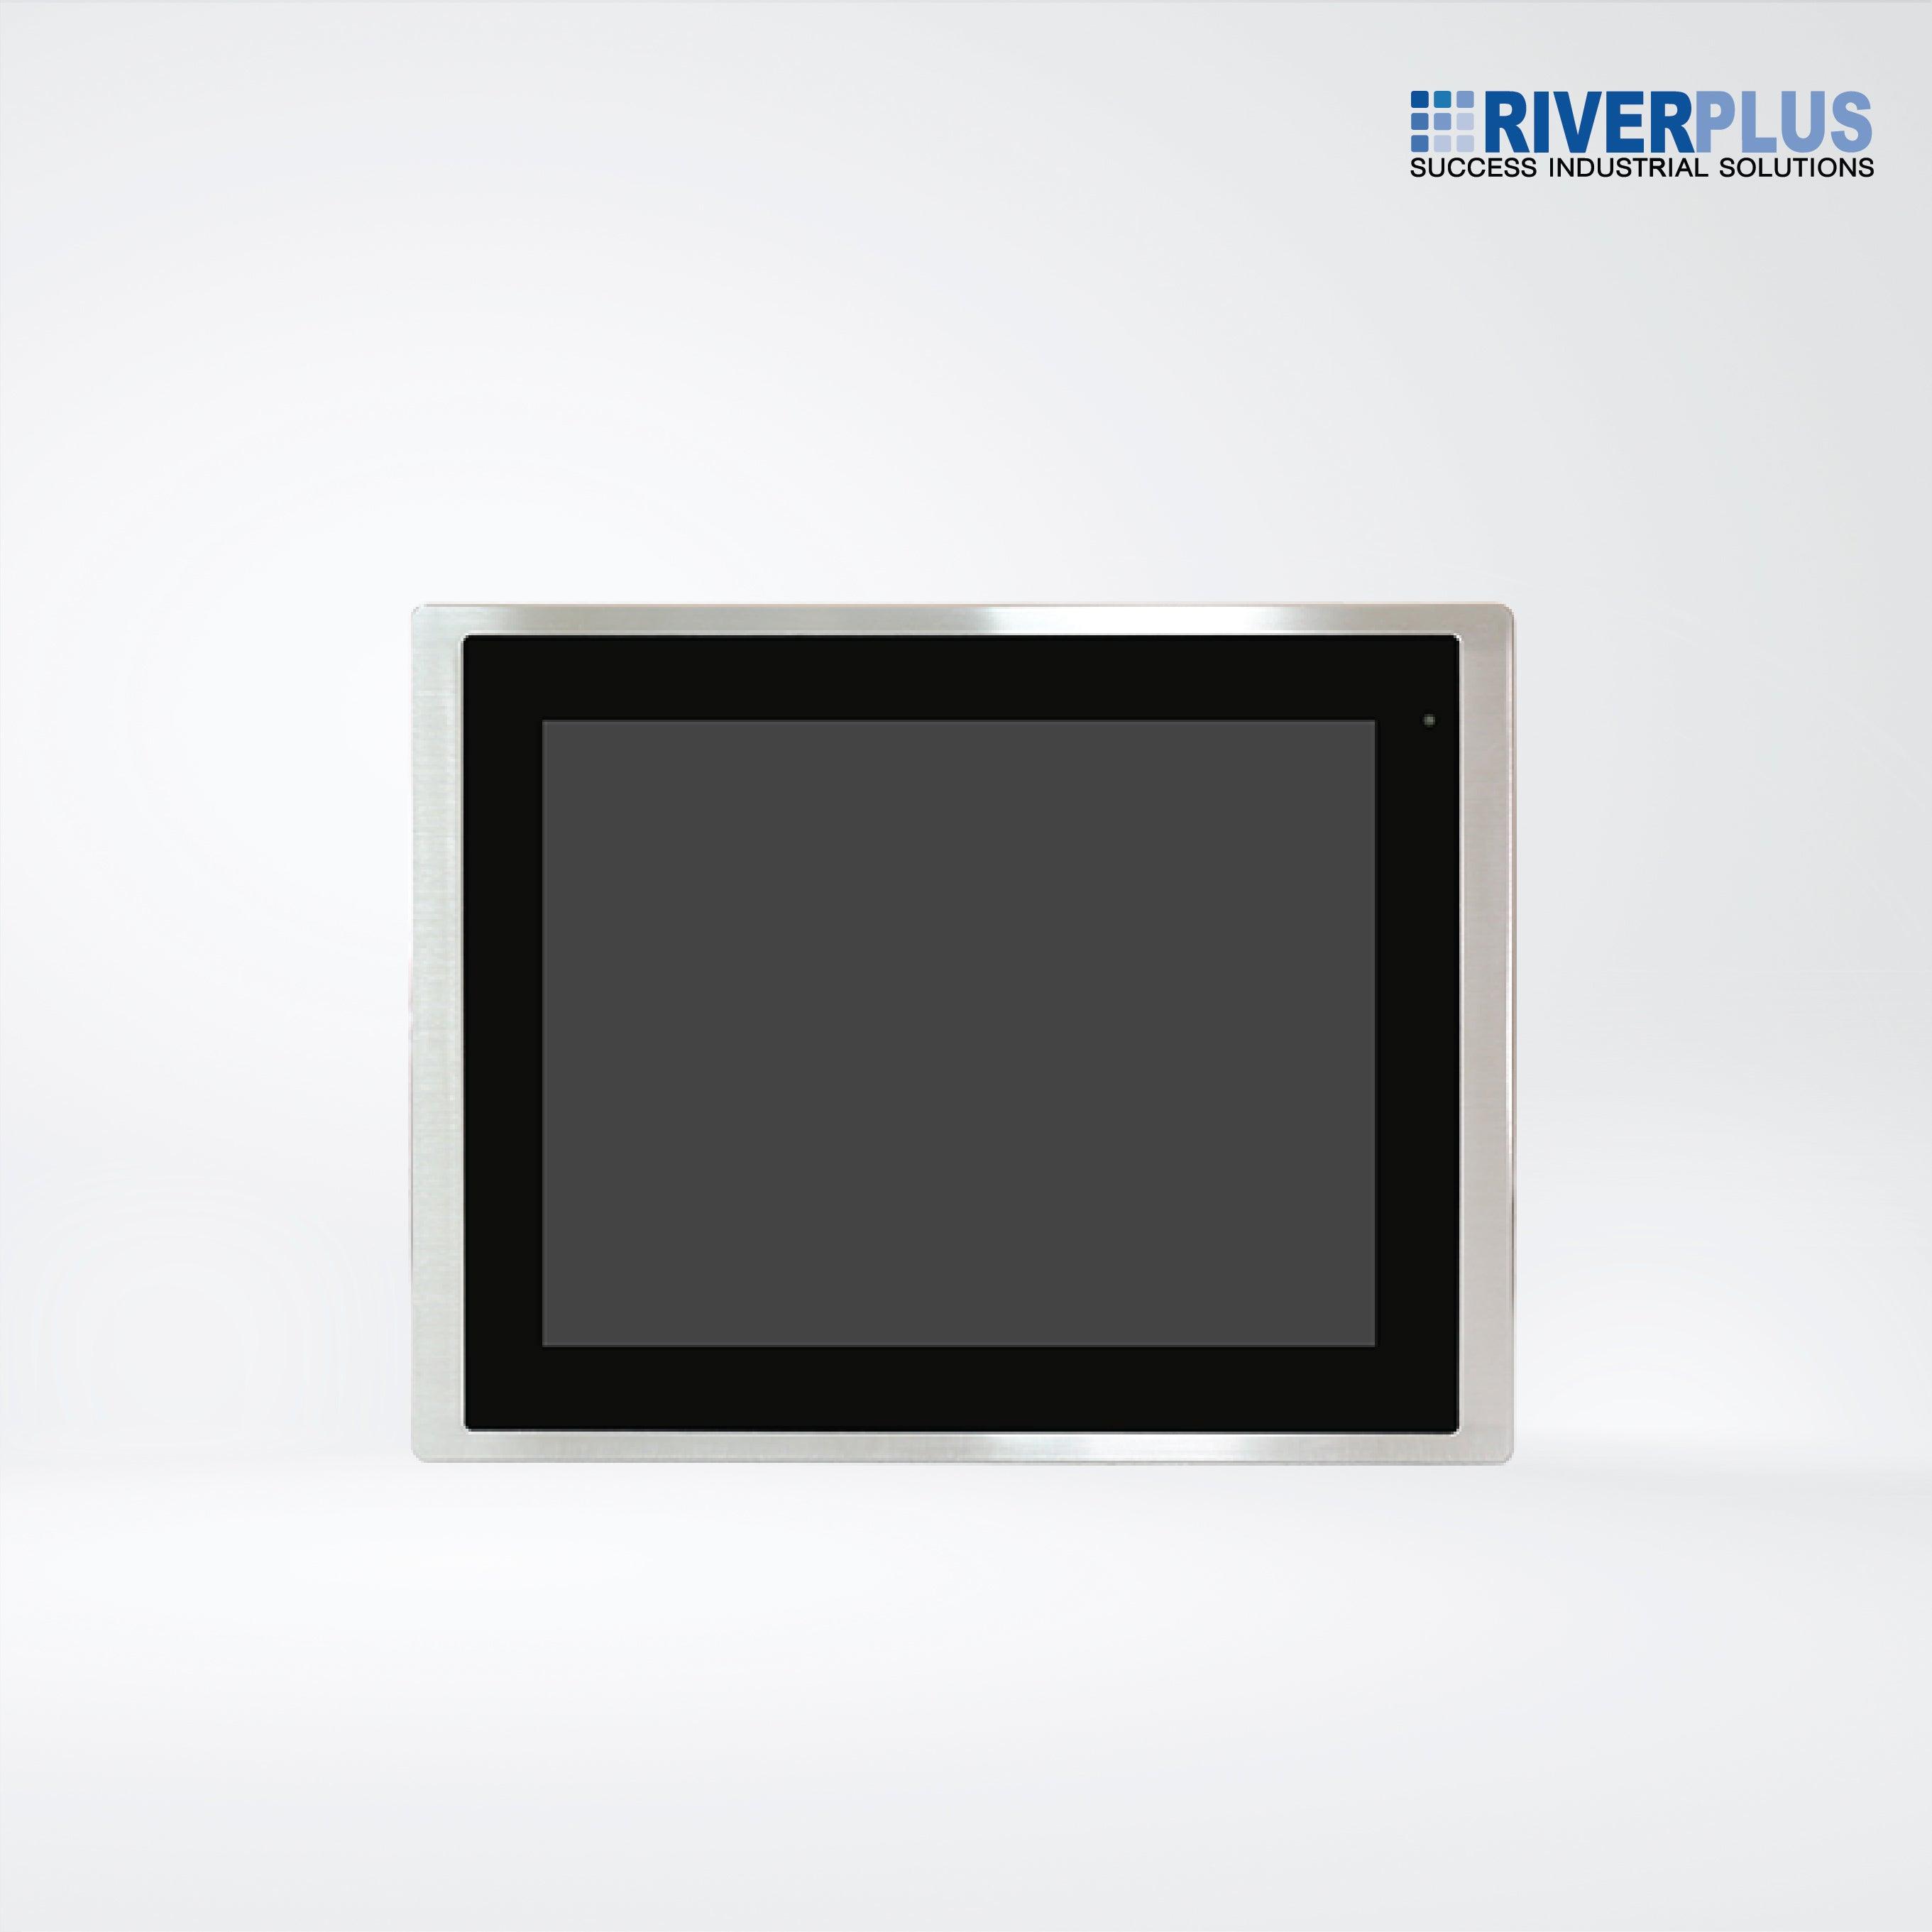 FABS-112G 12.1” Flat Front Panel IP66 Stainless Chassis Display - Riverplus